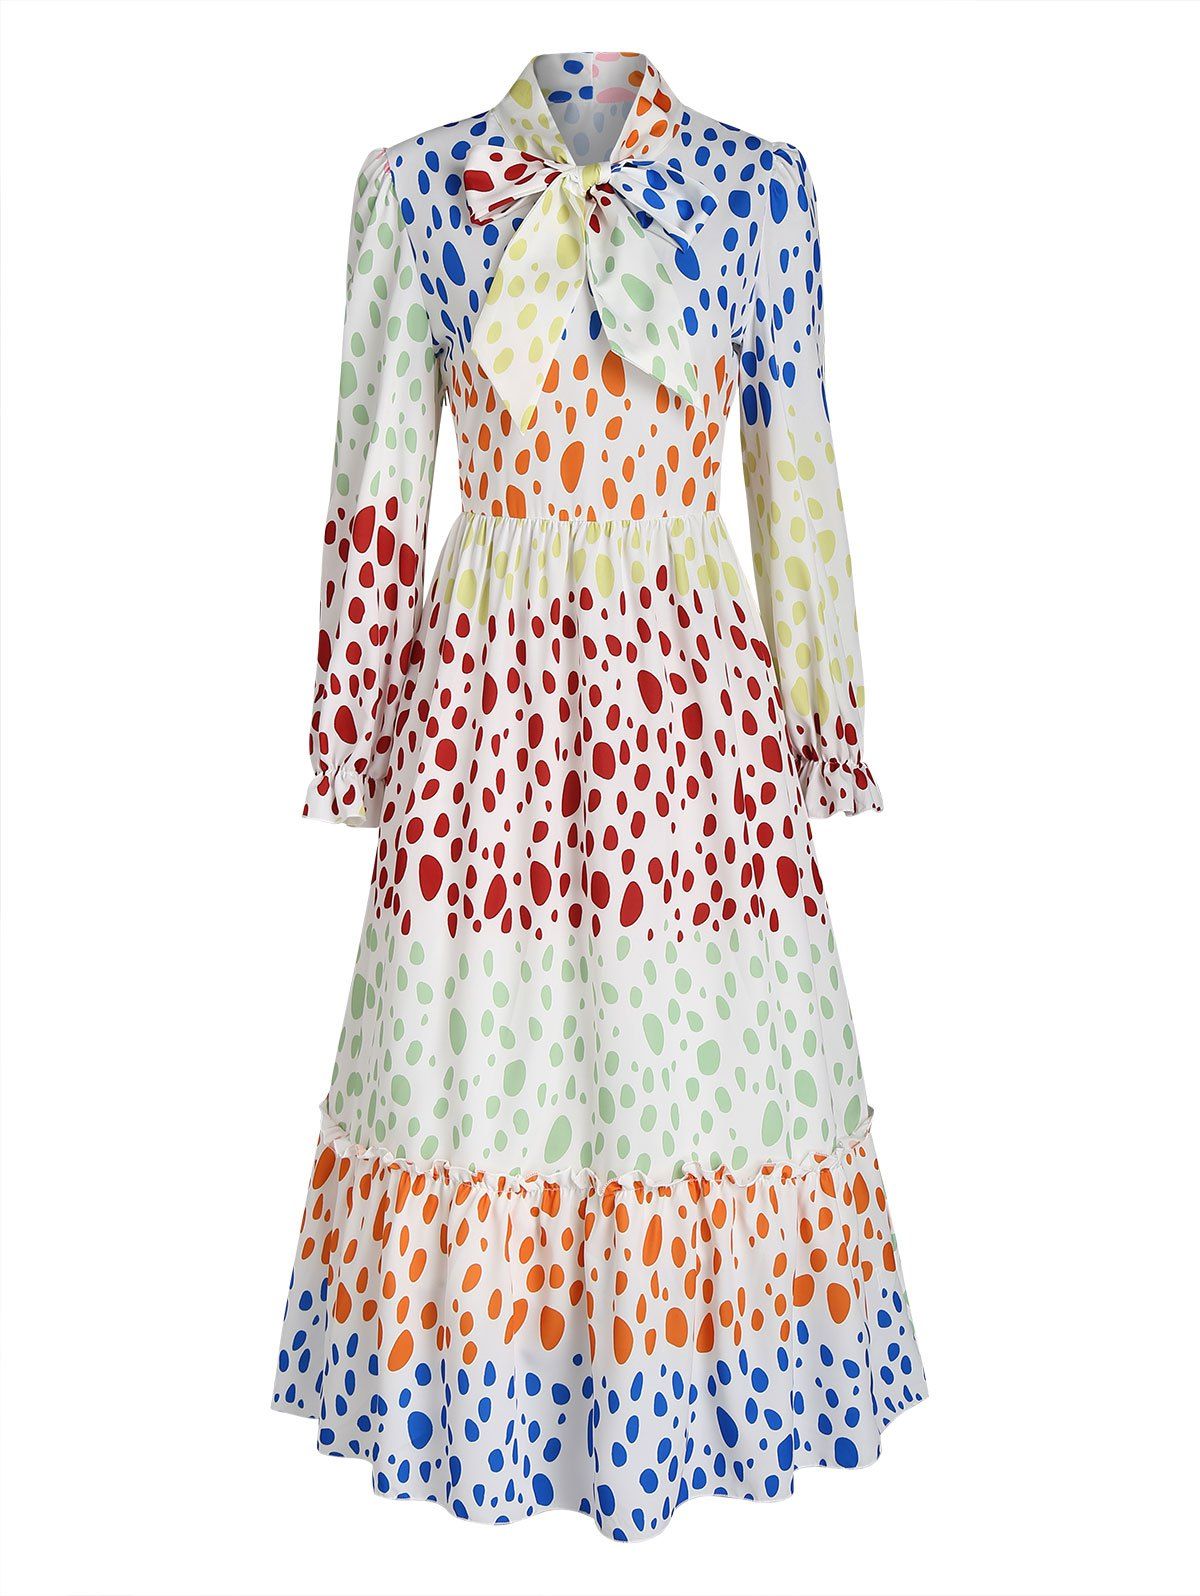 Bow Tie Colorful Spotted Print Maxi Dress - multicolor M